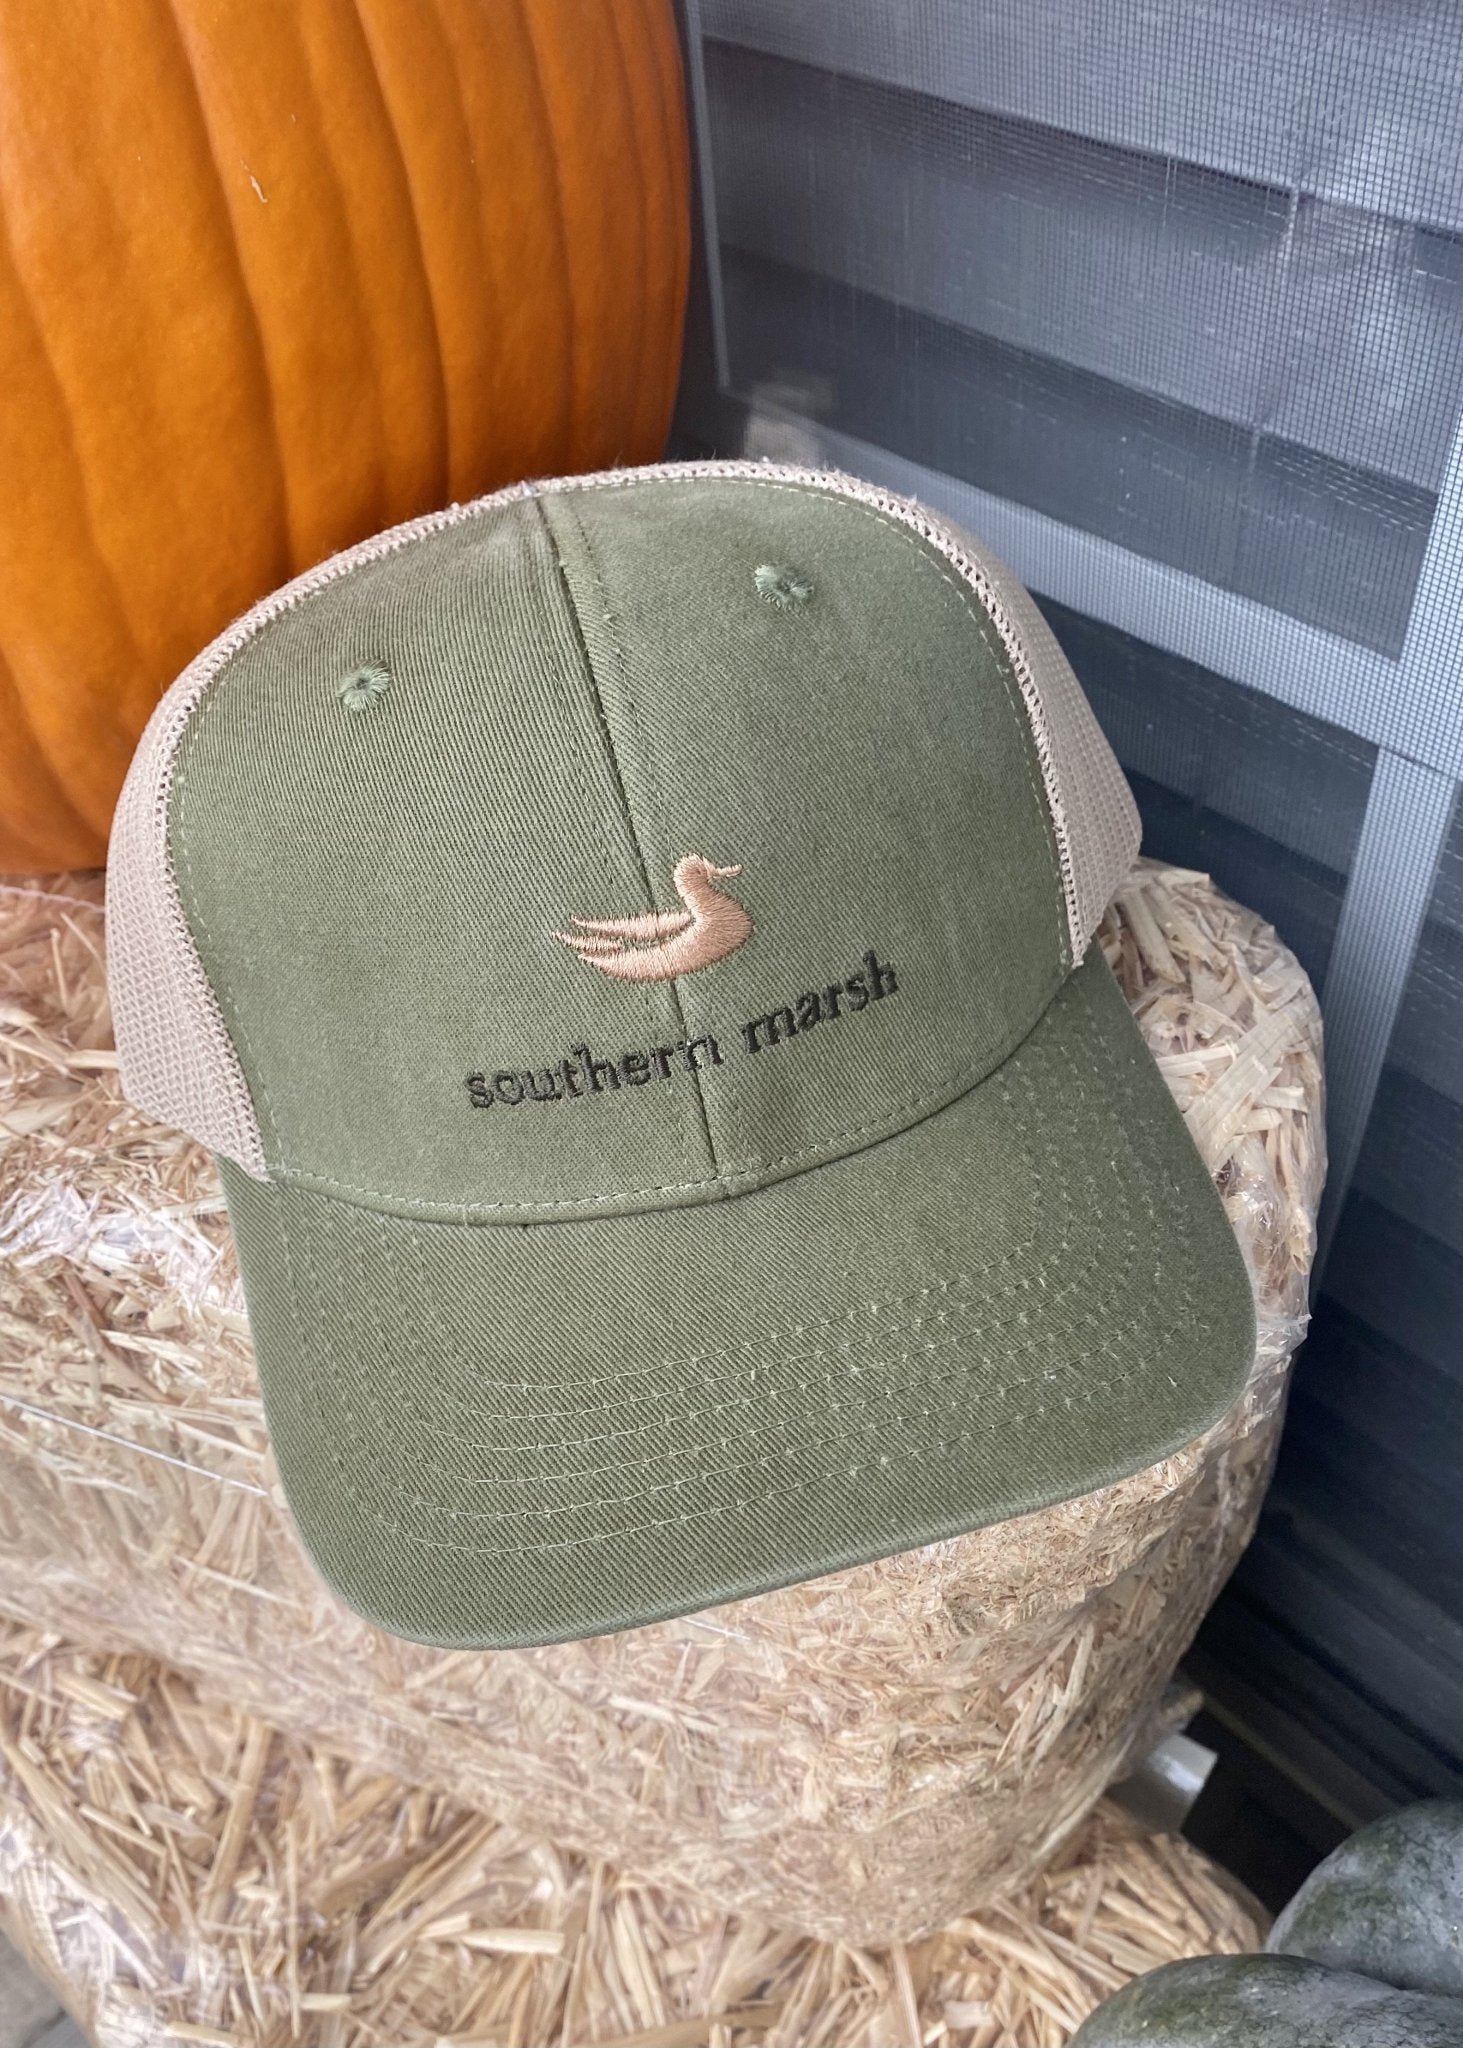 Southern Marsh Trucker Hat - Classic - Dark Olive - Jimberly's Boutique